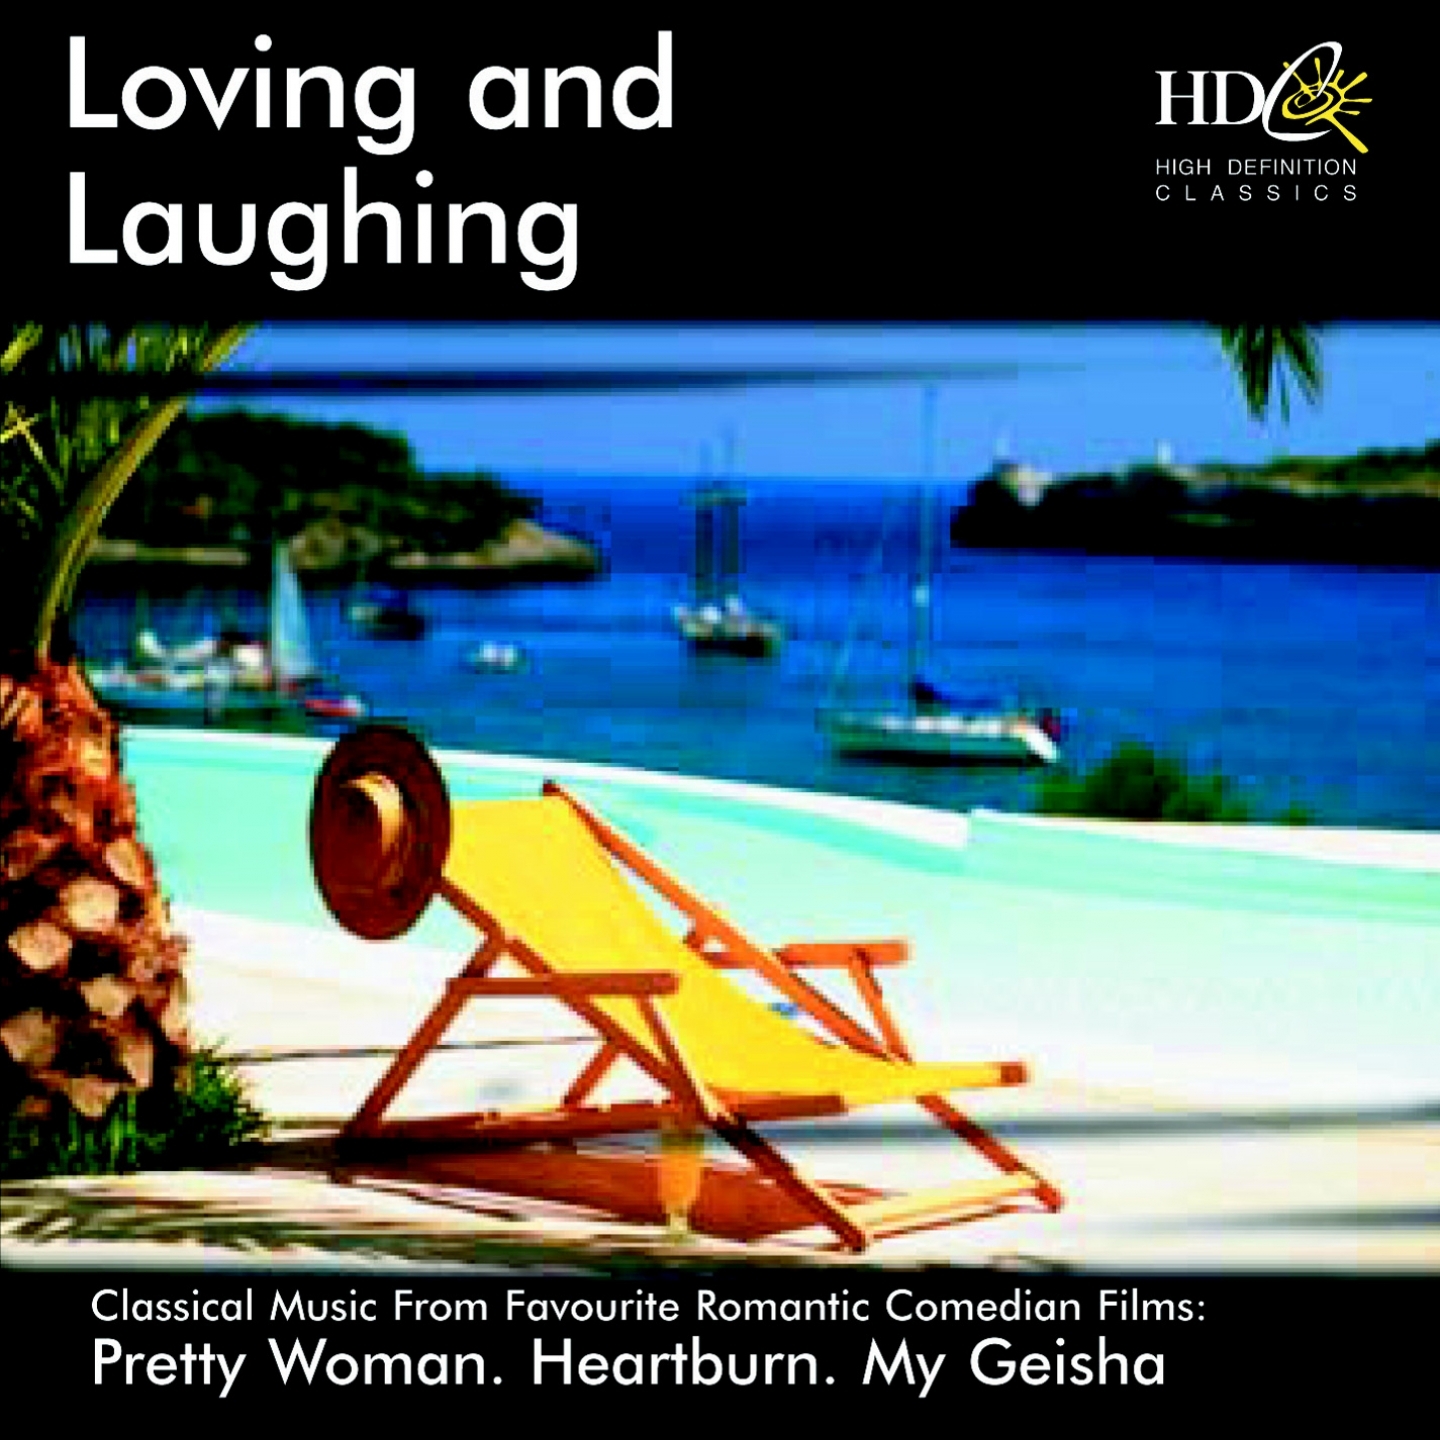 Loving and Laughing